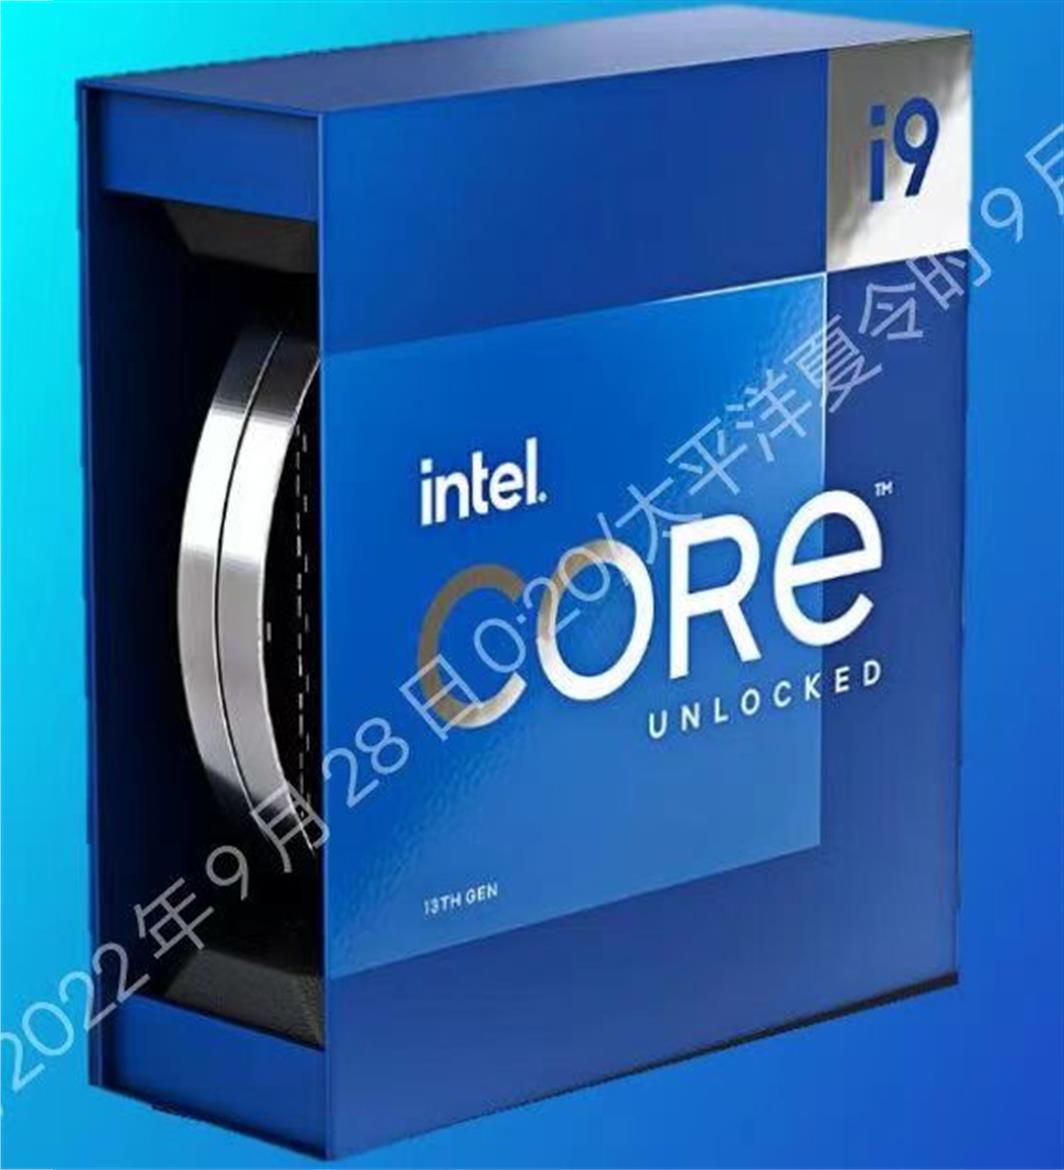 Intel 13th Gen Raptor Lake Box Leaks And There’s A Small Wafer Inside